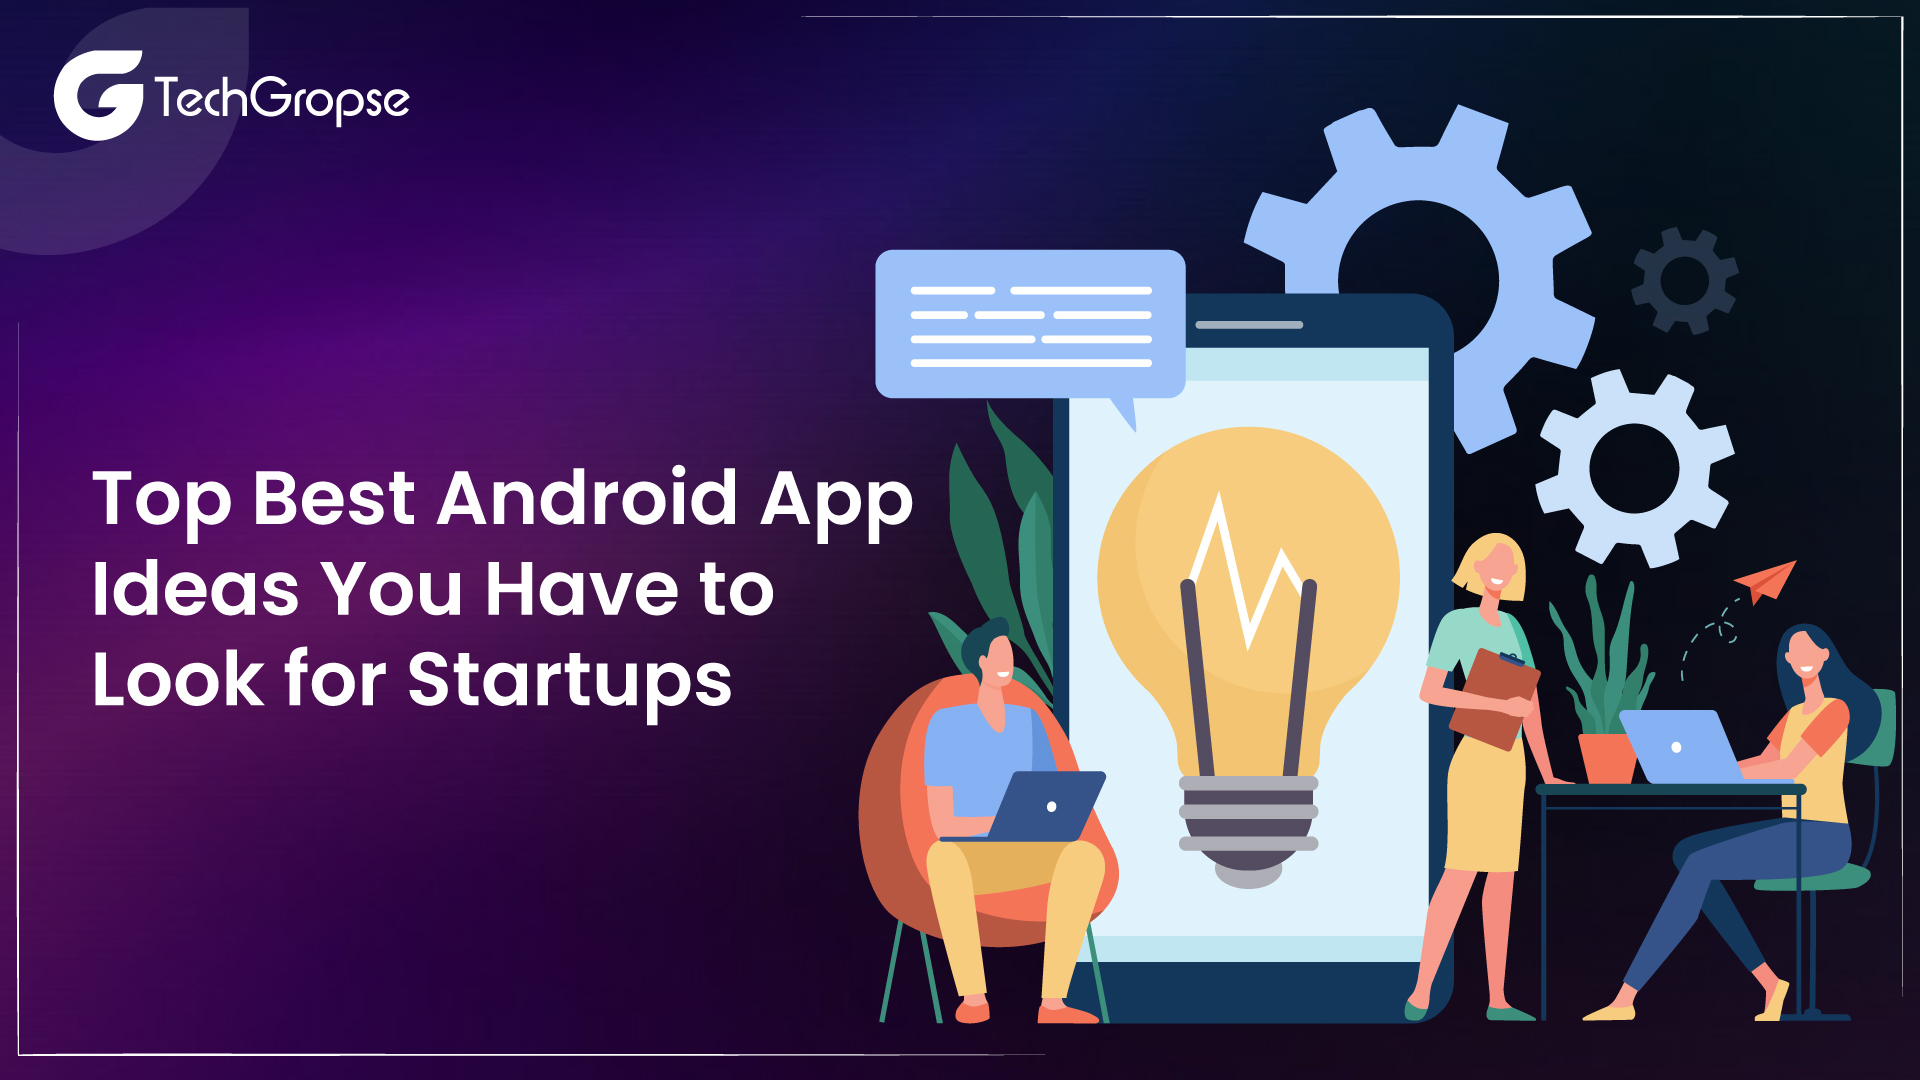 Top Best Android App Ideas You Have to Look for Startups